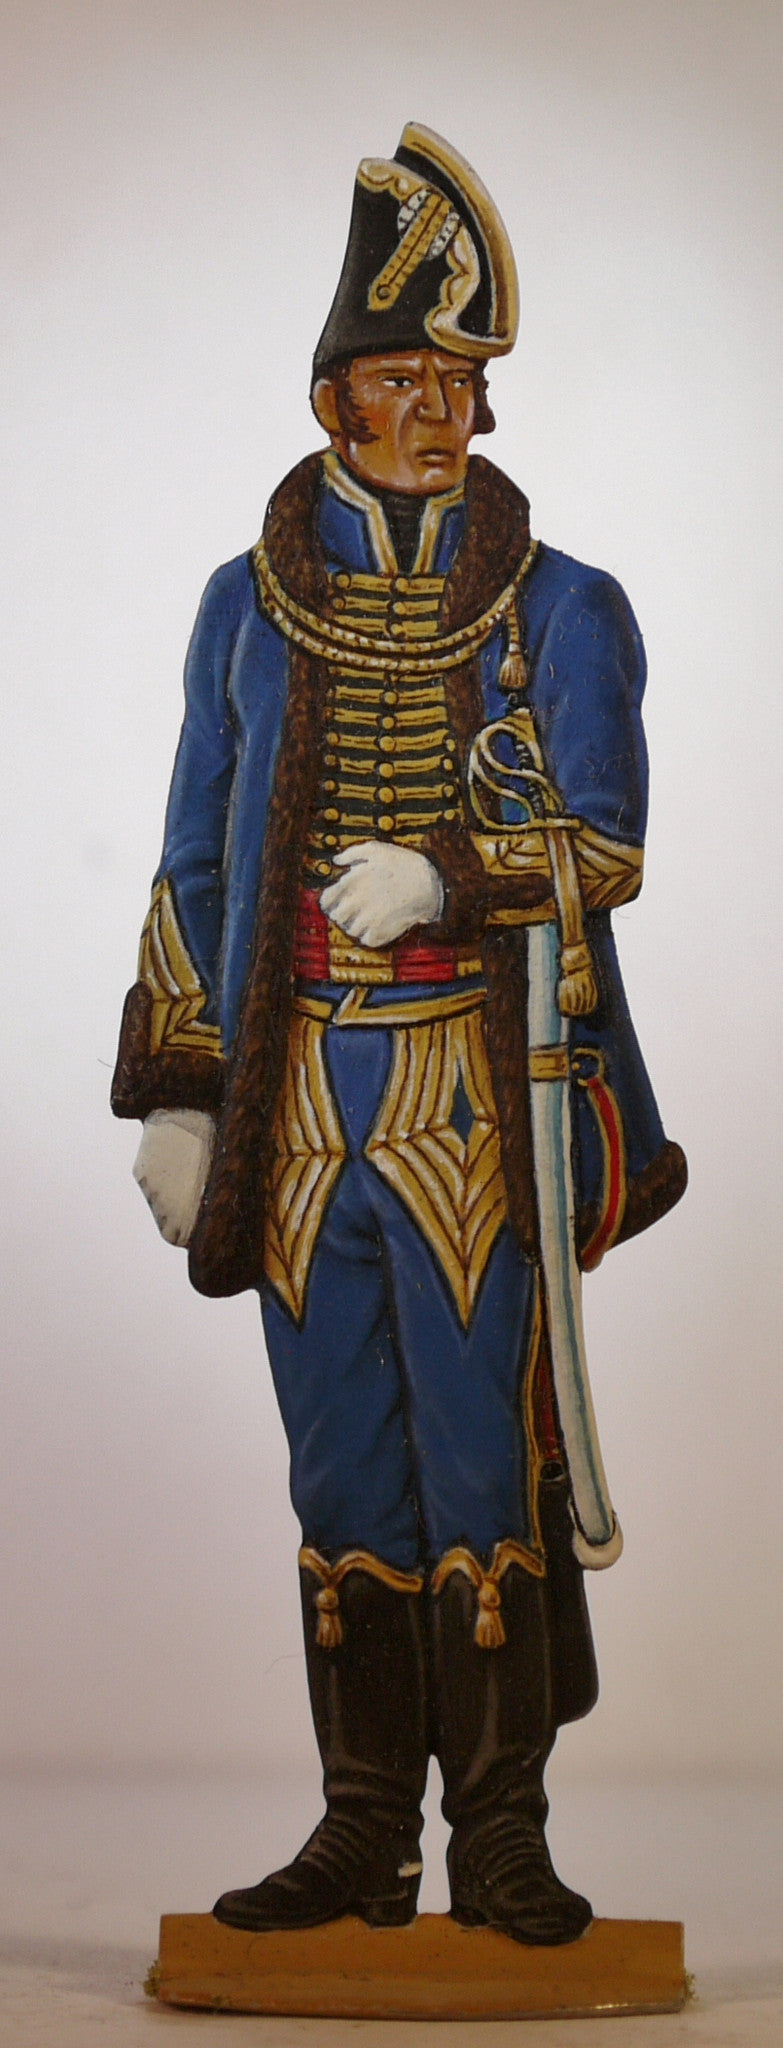 General Pajol, Light Cavalry. - Glorious Empires-Historical Miniatures  